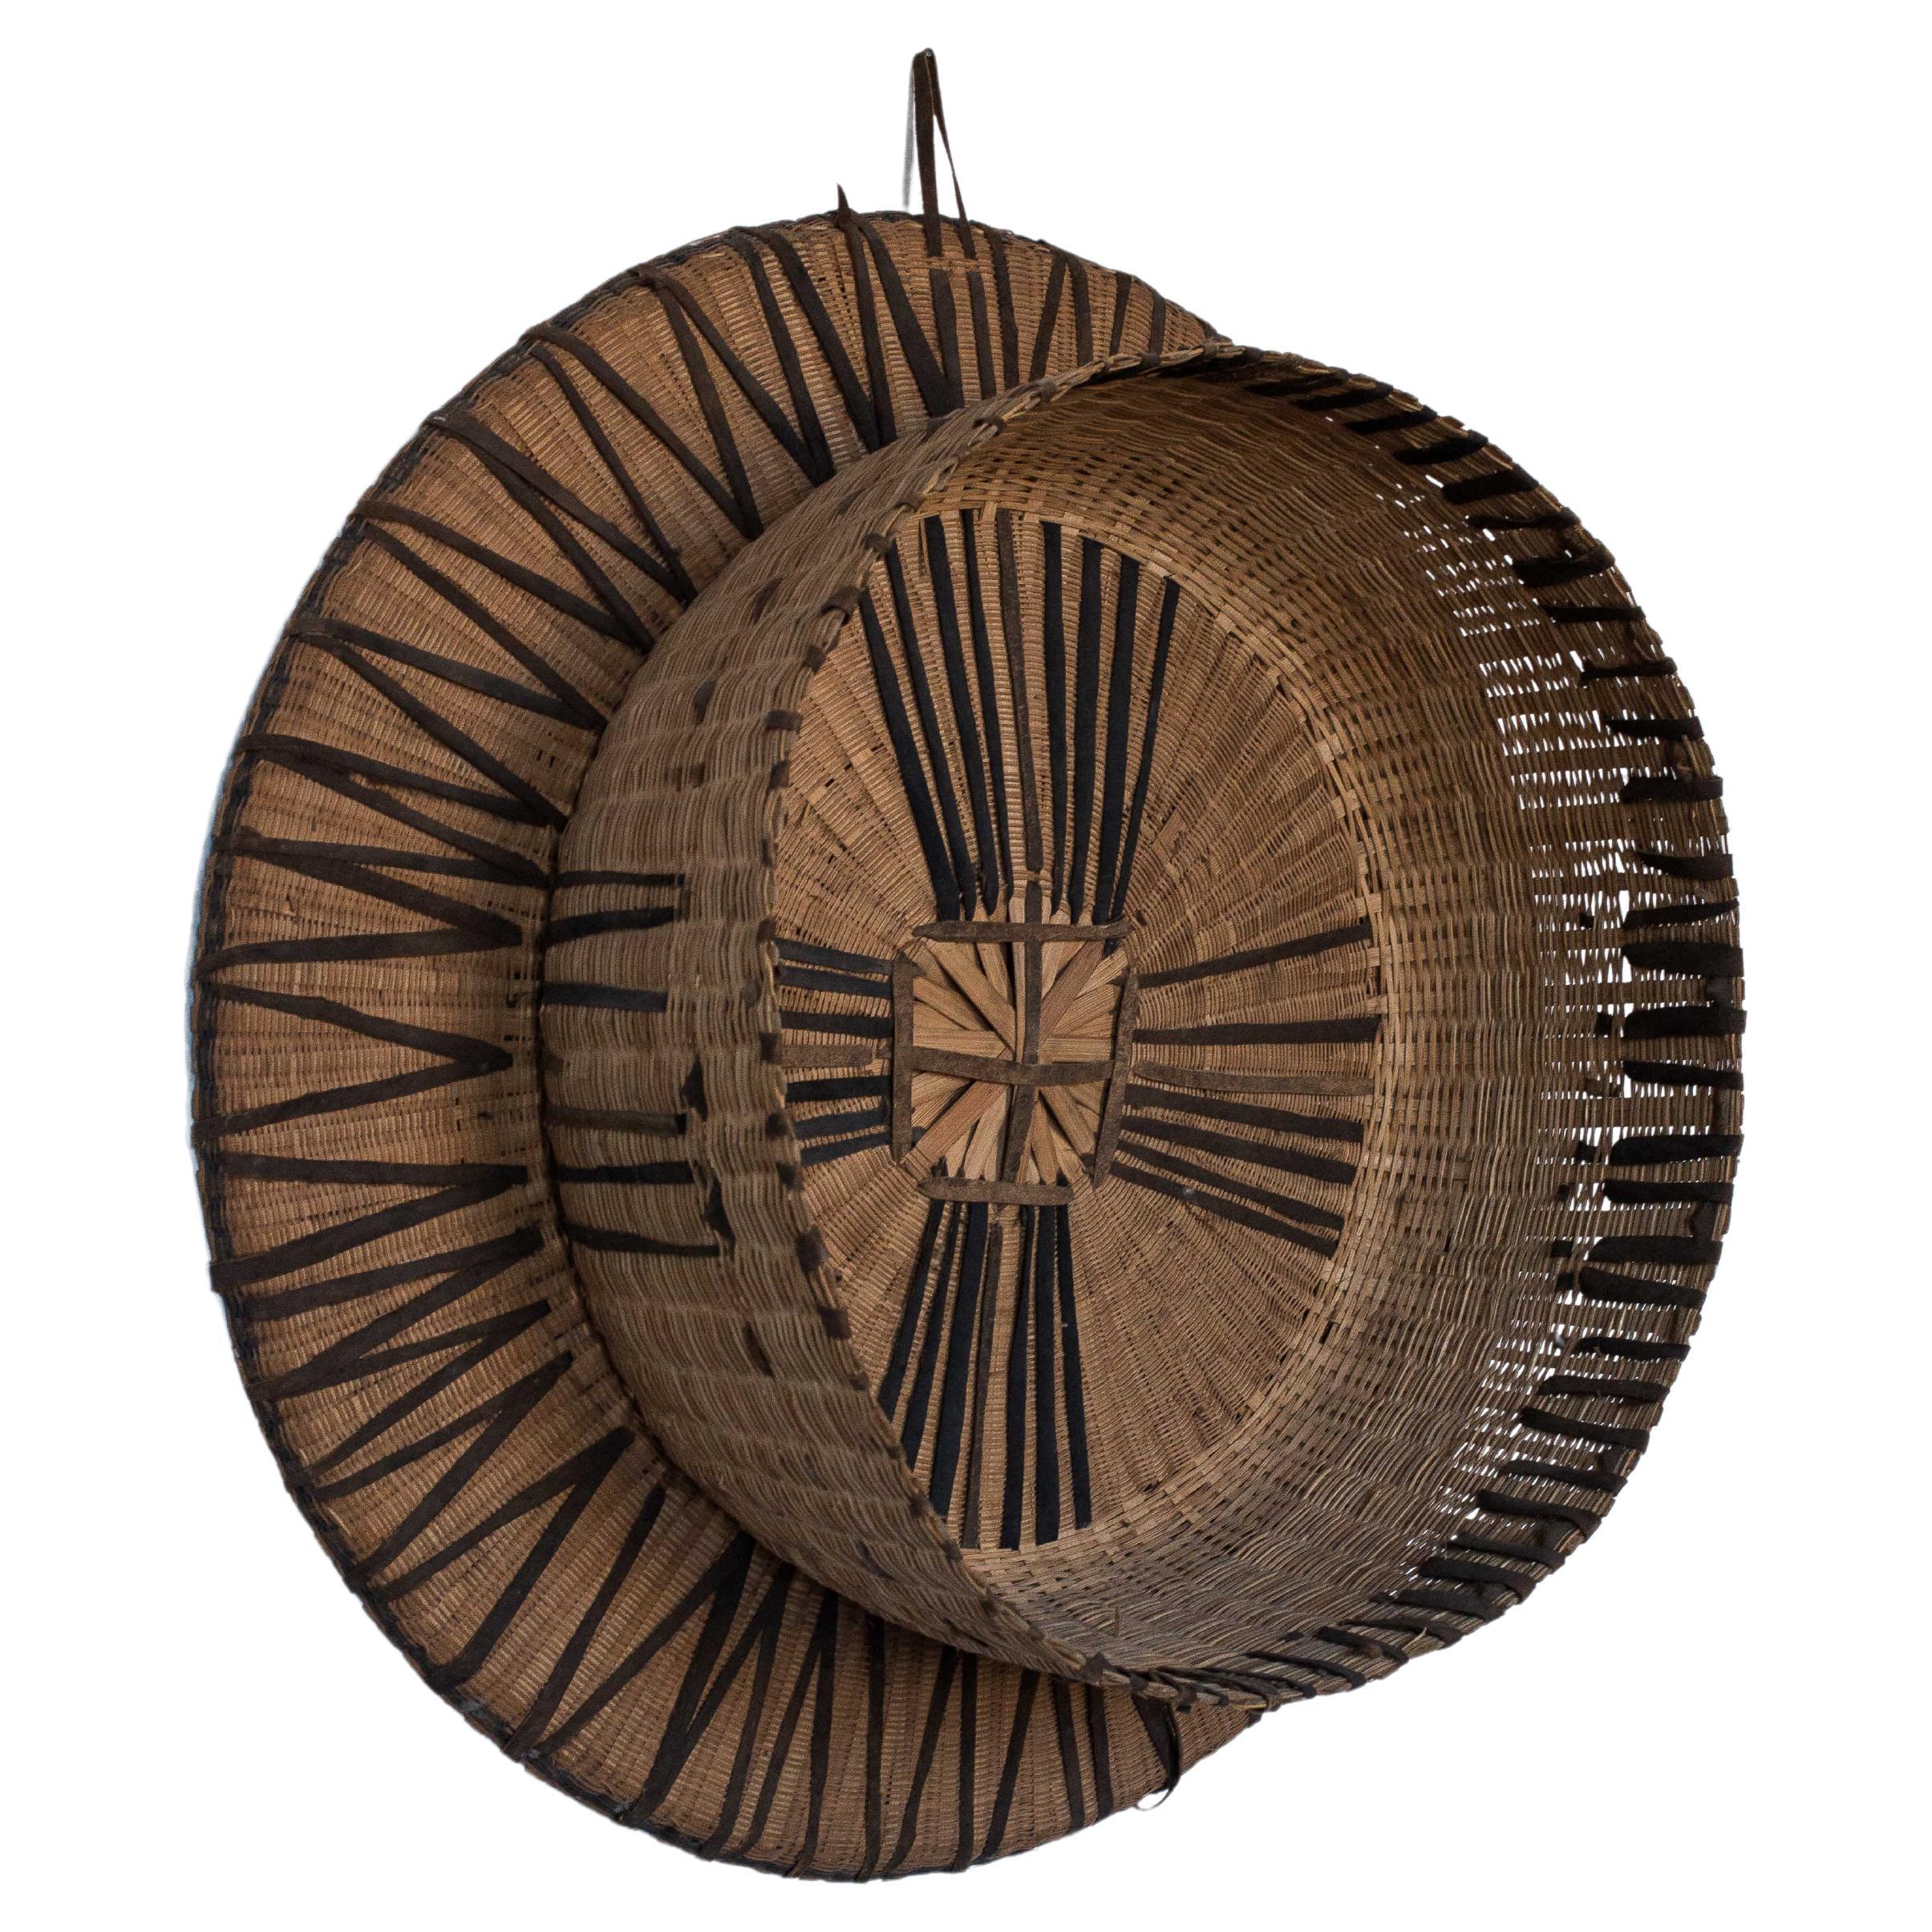 Very Large Wall Basket, Straw and Leather, African Folk Art 1970 For Sale